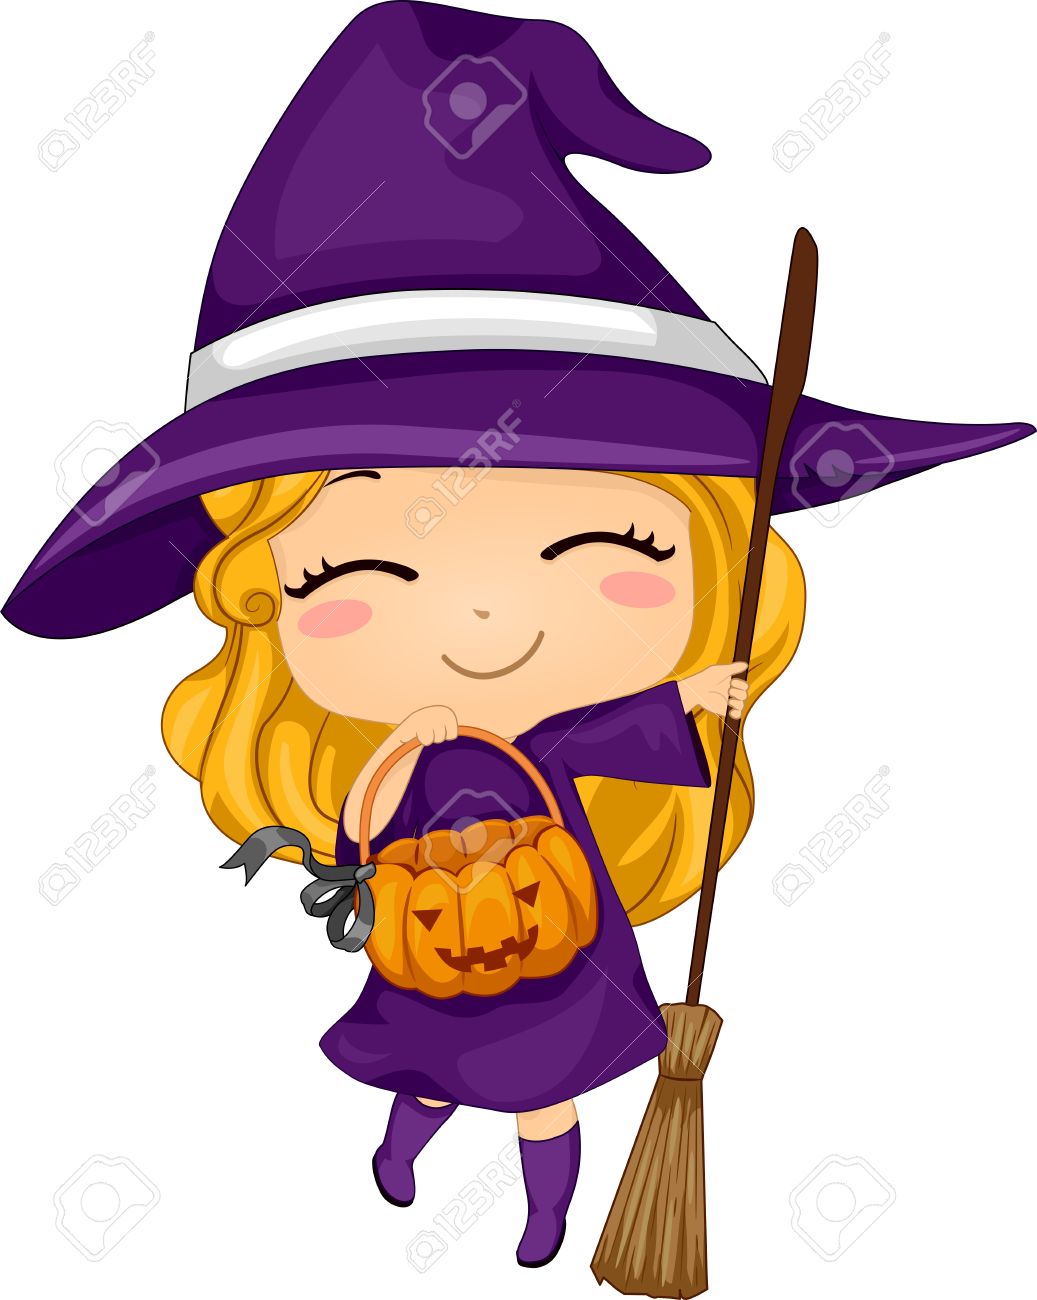 Cartoon witch clipart.